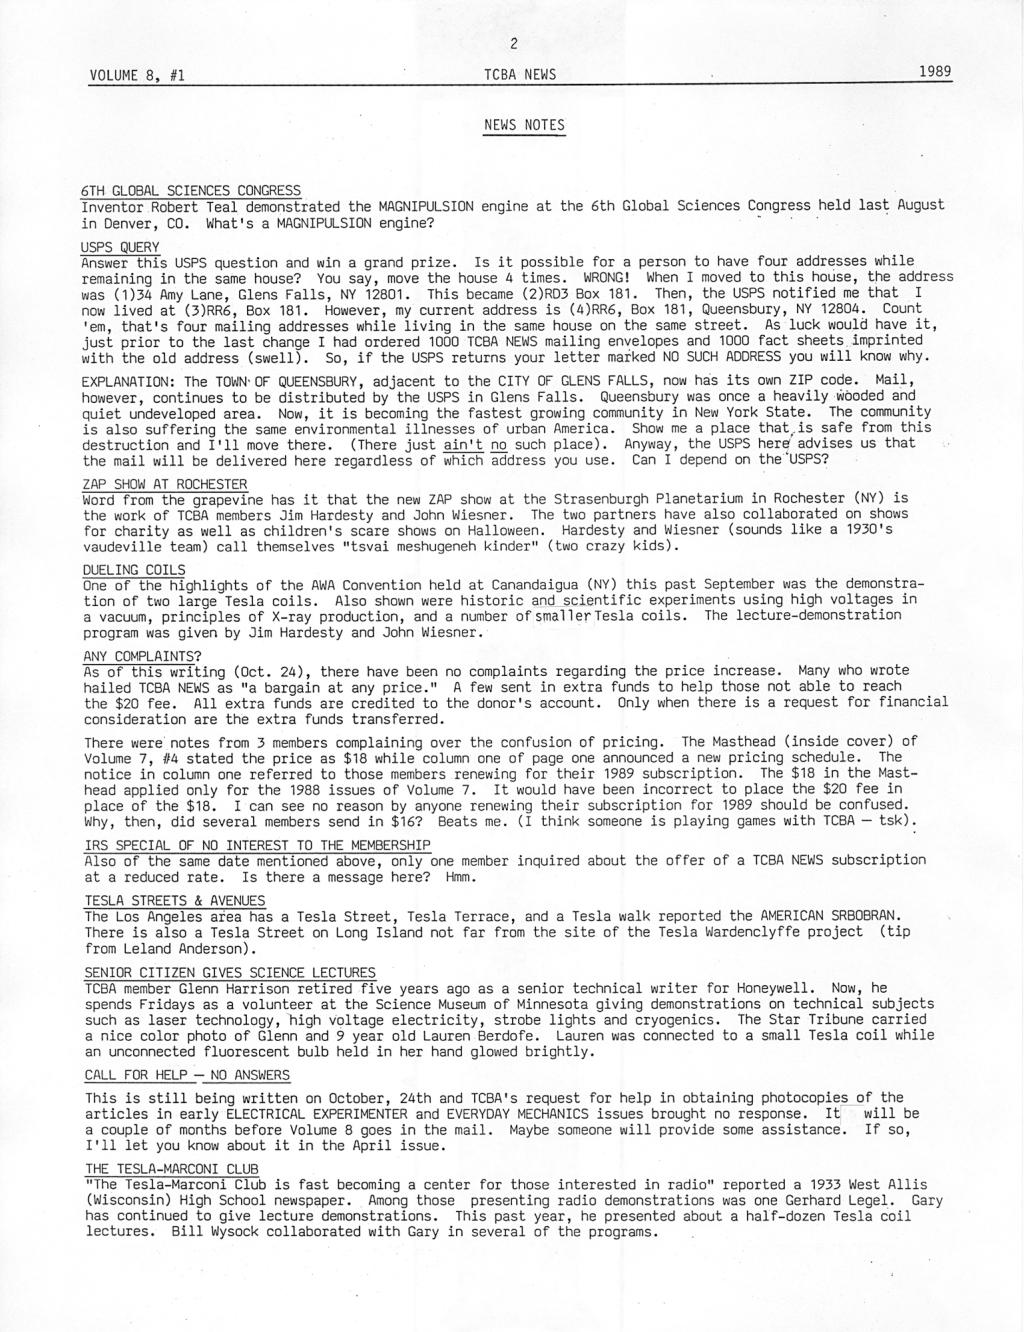 TCBA Volume 8 - Issue 1 - Page 2 of 18